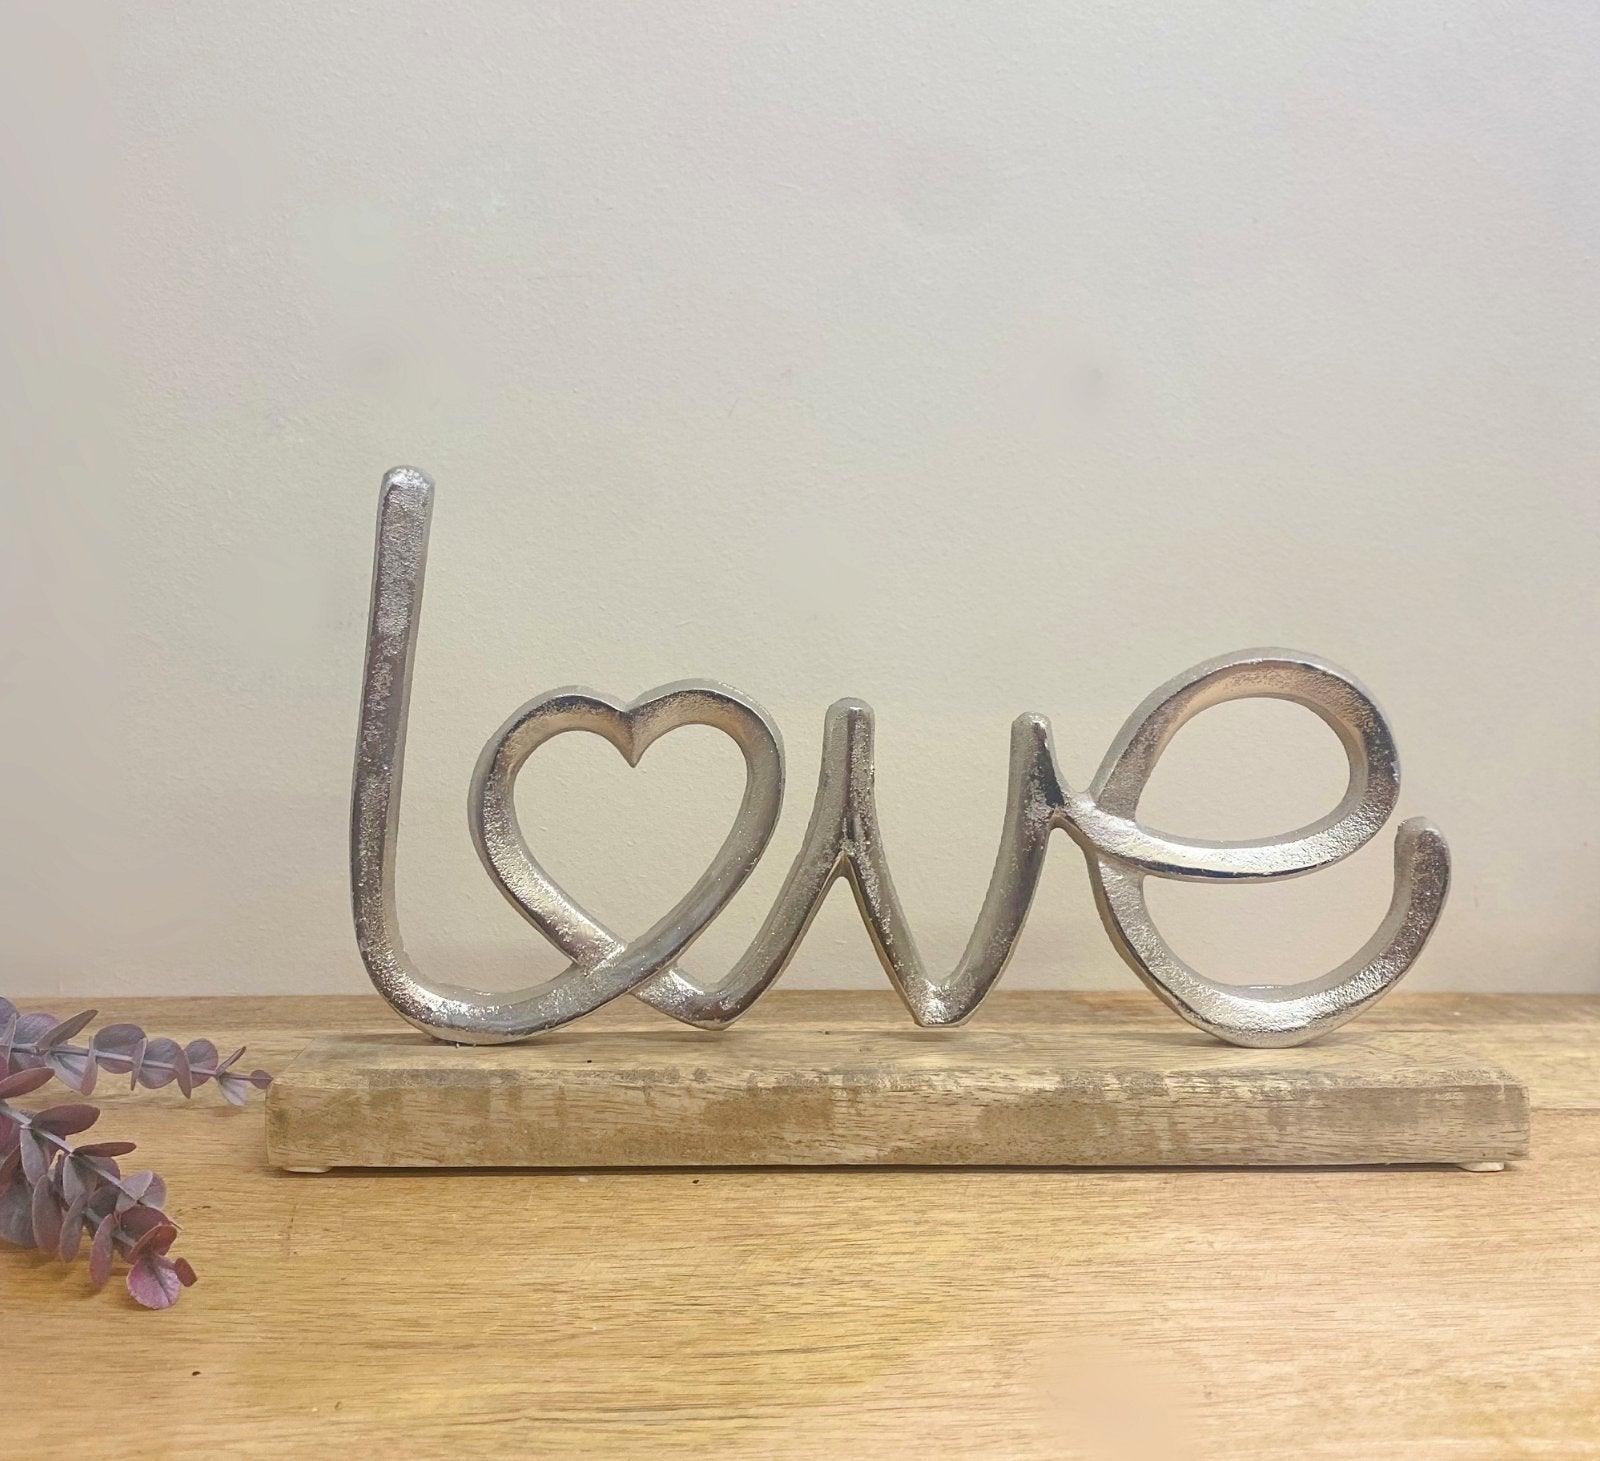 Metal Silver Love Ornament On A Wooden Base - £28.99 - 